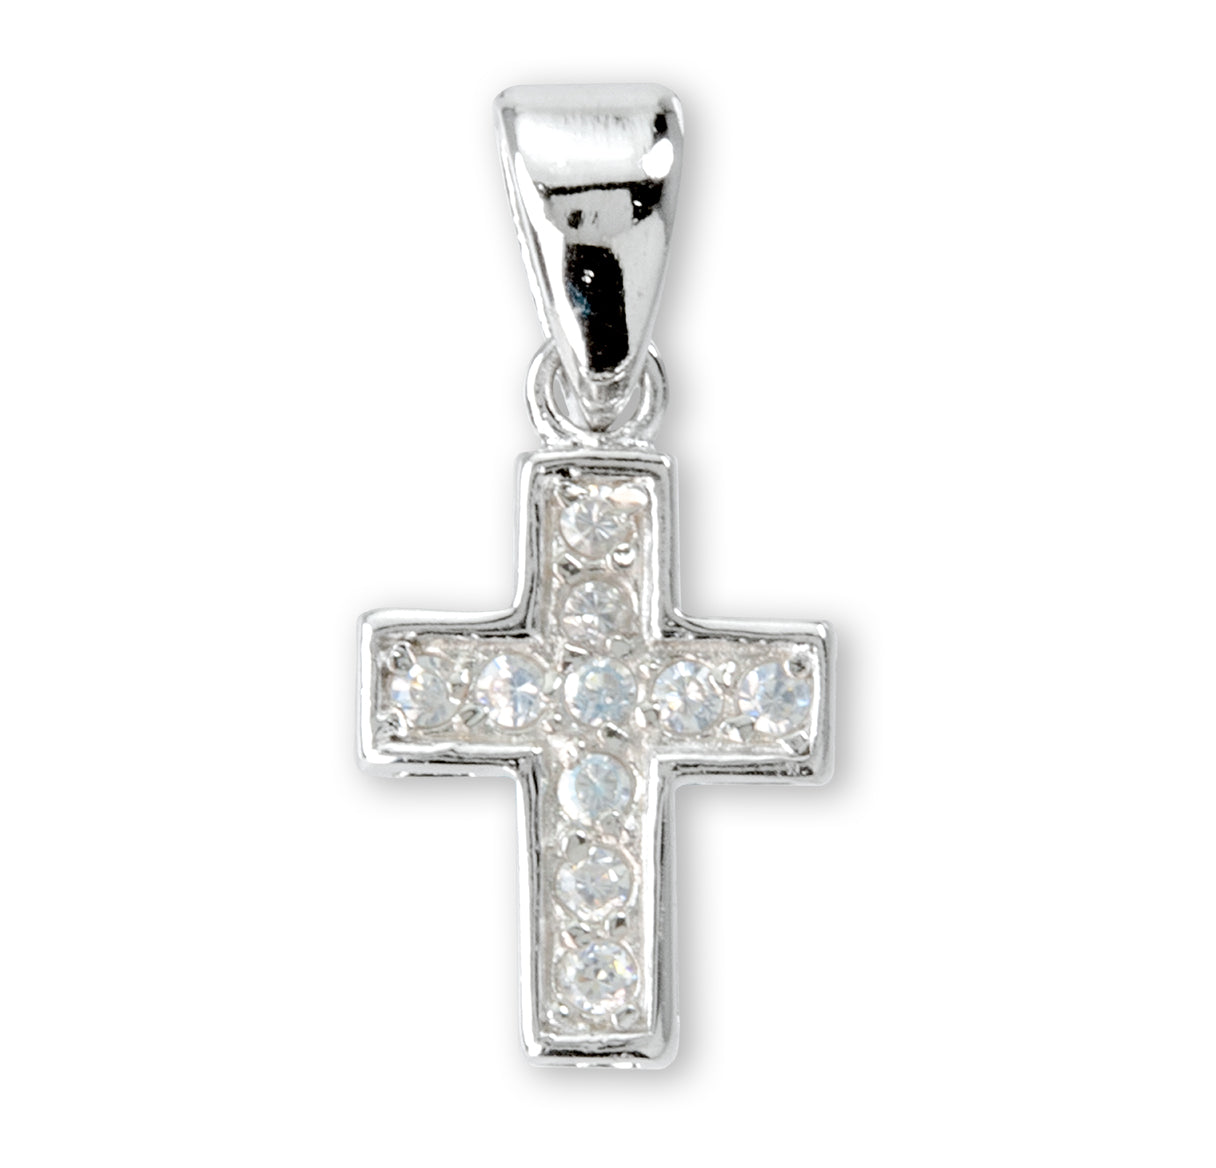 Sterling Small Cross with Cubic Zirconia's "CZ's"